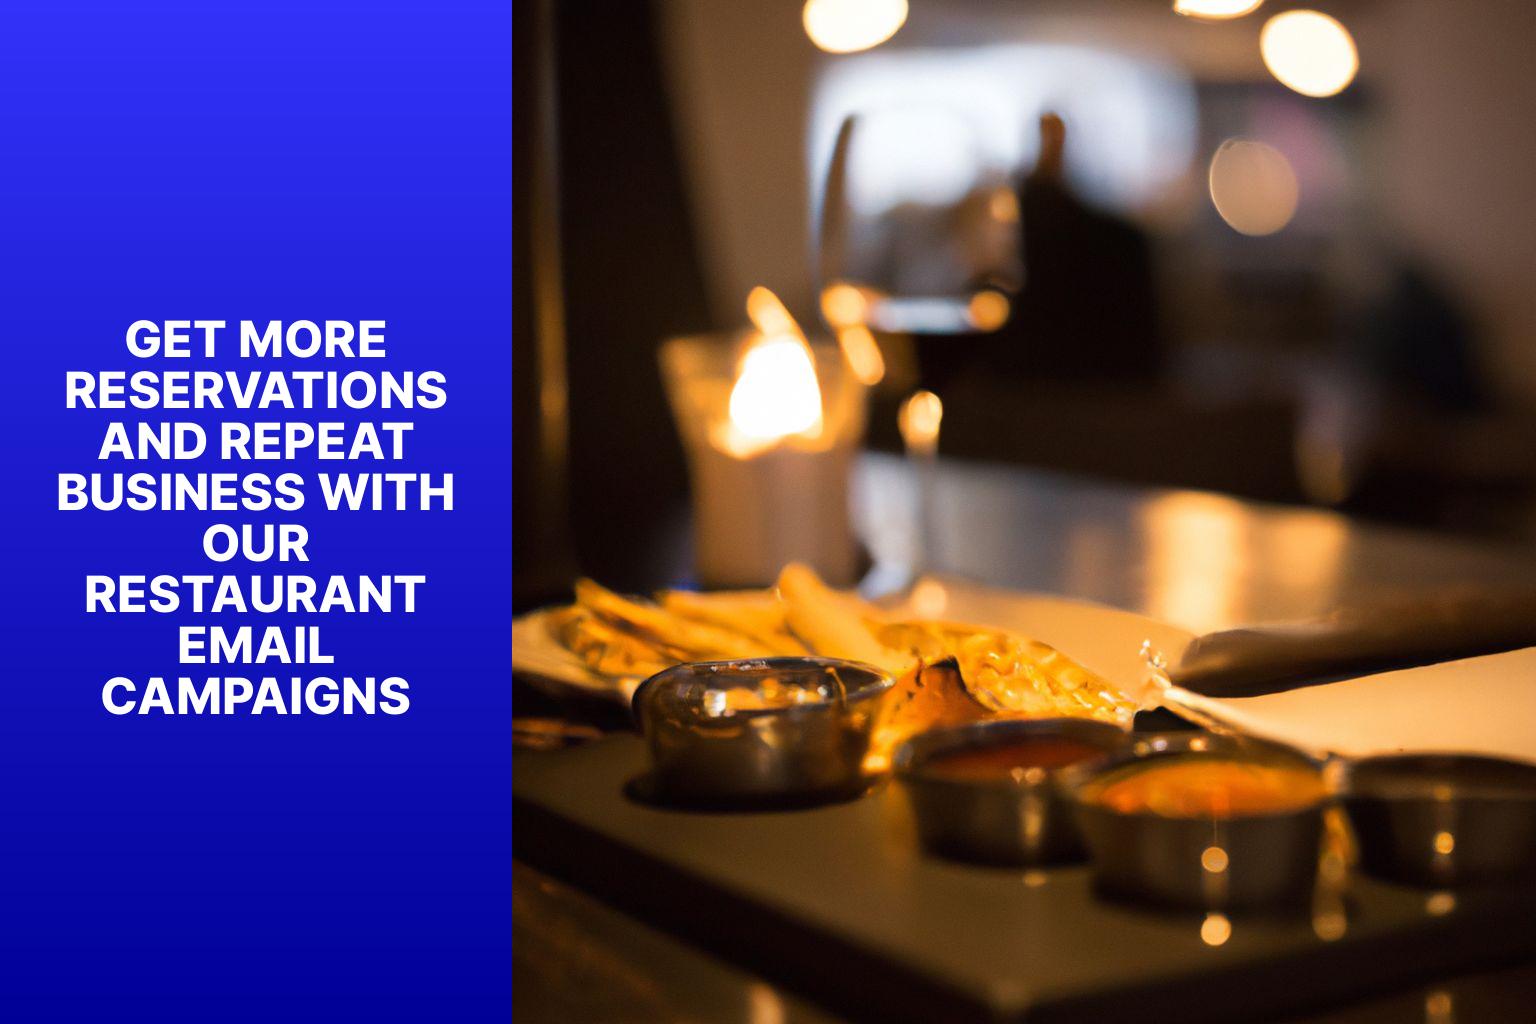 Get More Reservations and Repeat Business with Our Restaurant Email Campaigns